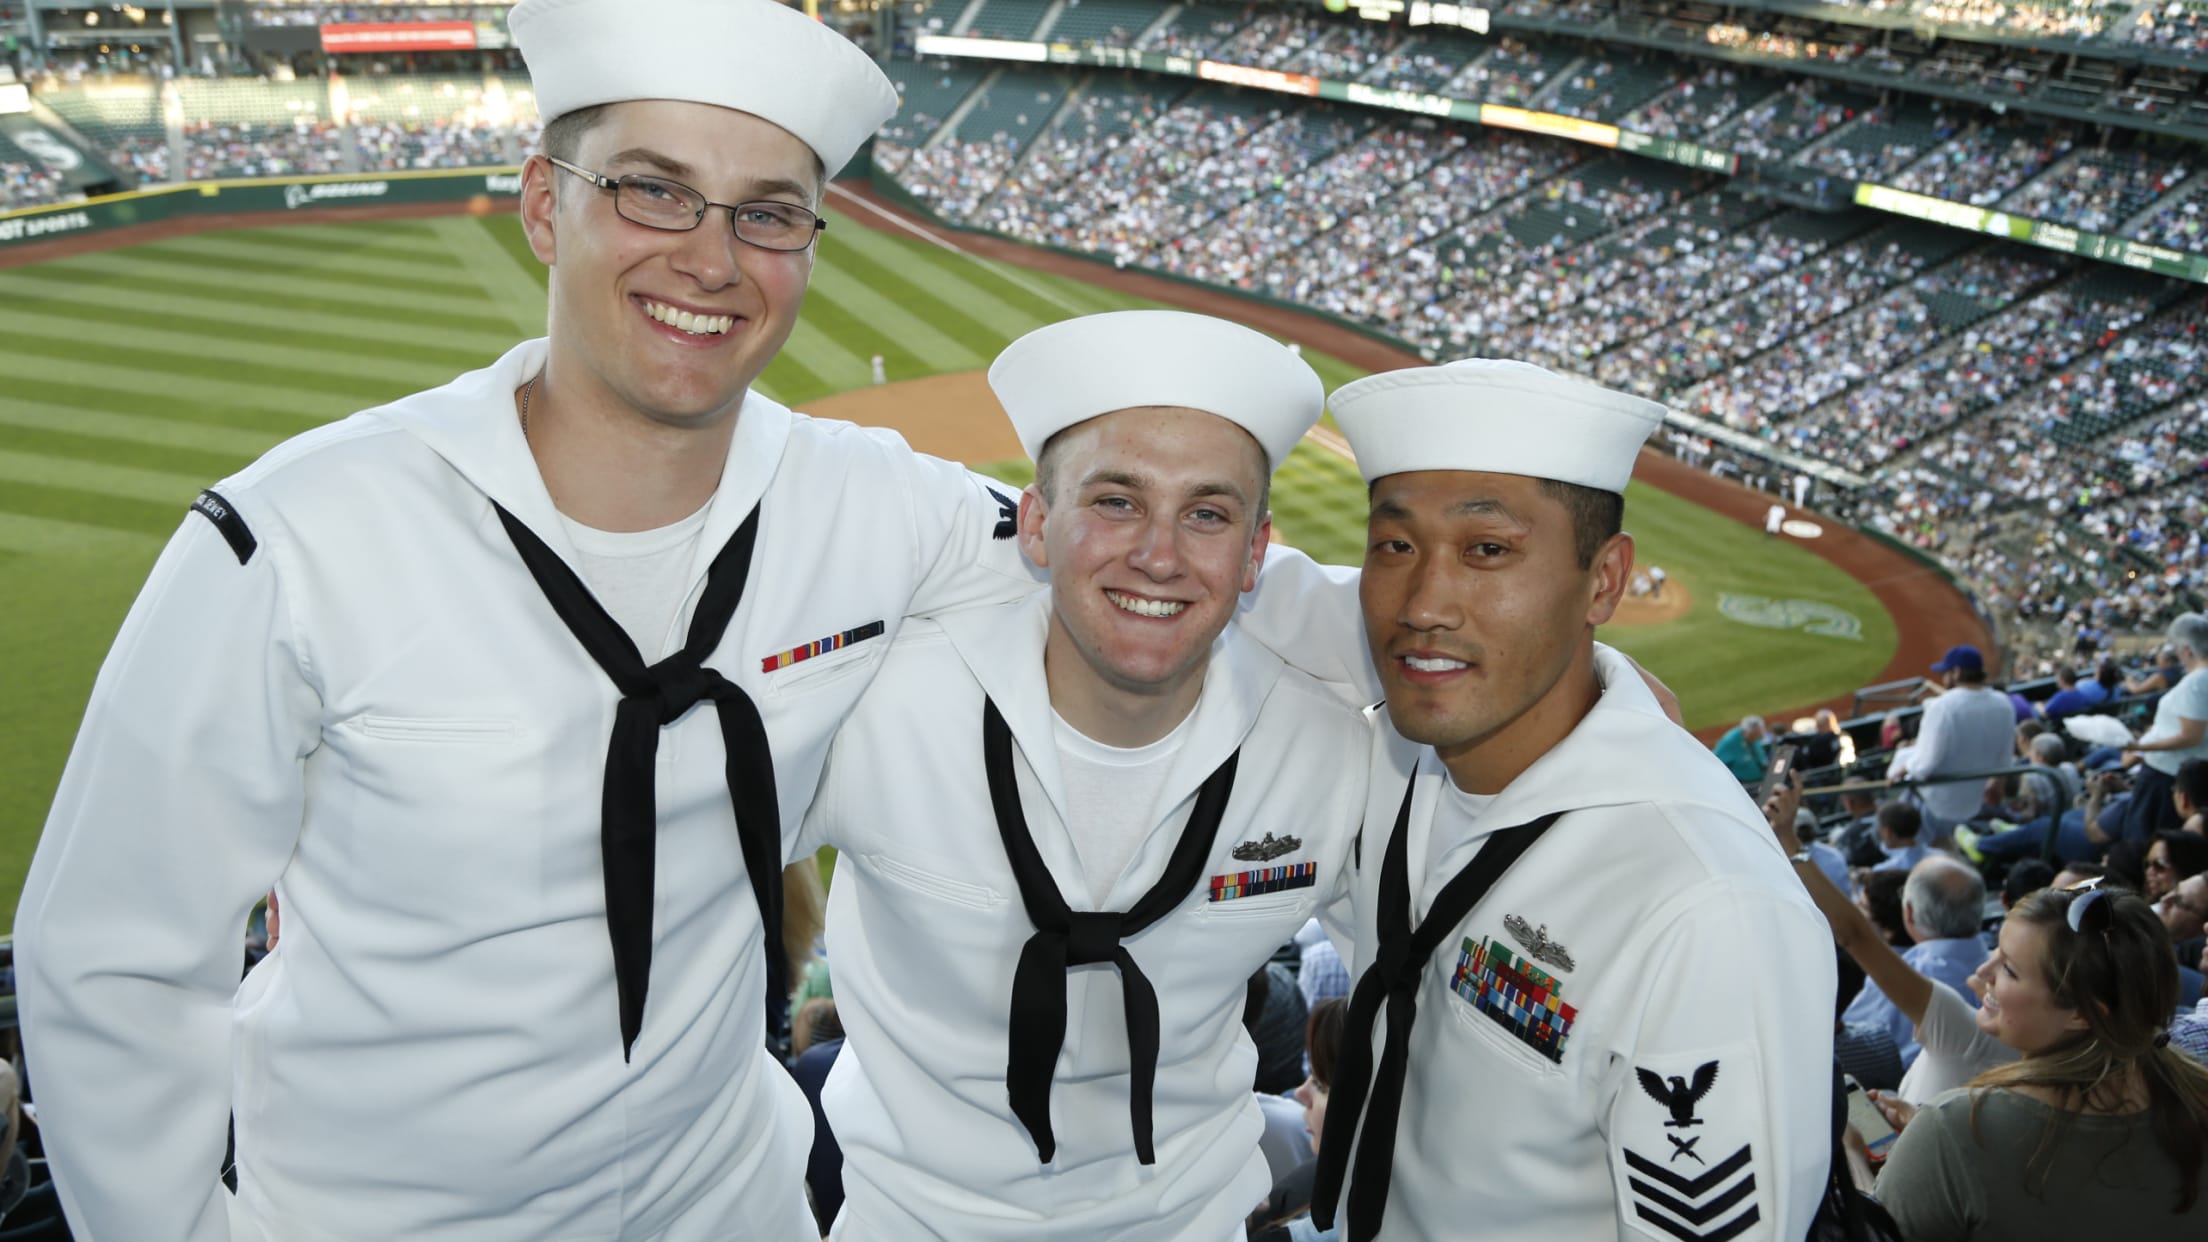 Seattle Mariners - Today, we are the Marineros. It's Salute to